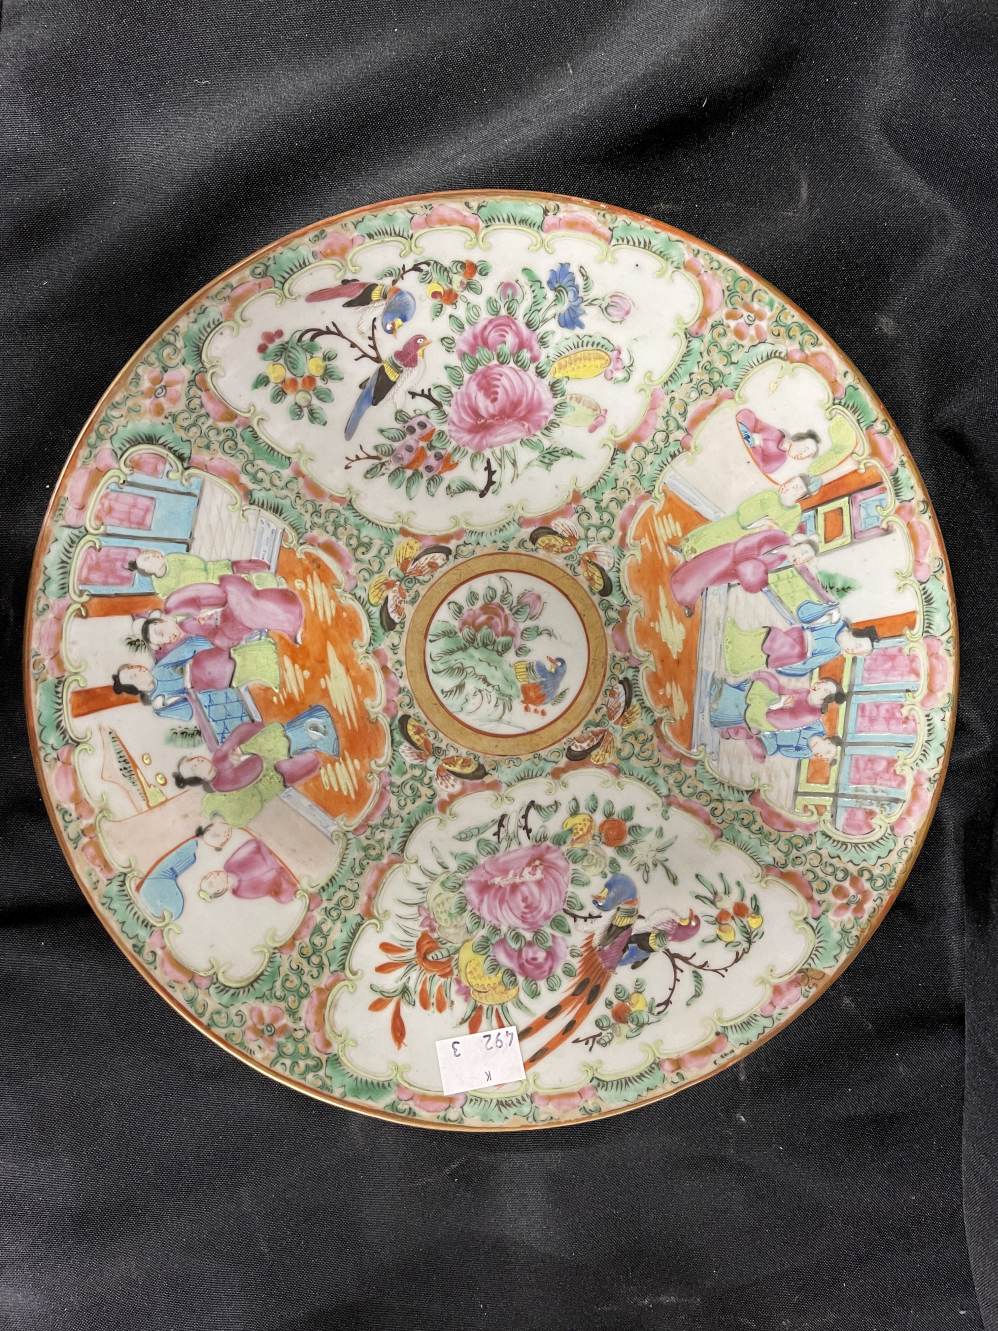 19th cent. Chinese Canton plates all typically decorated with panels of flowers, figures and - Image 2 of 7